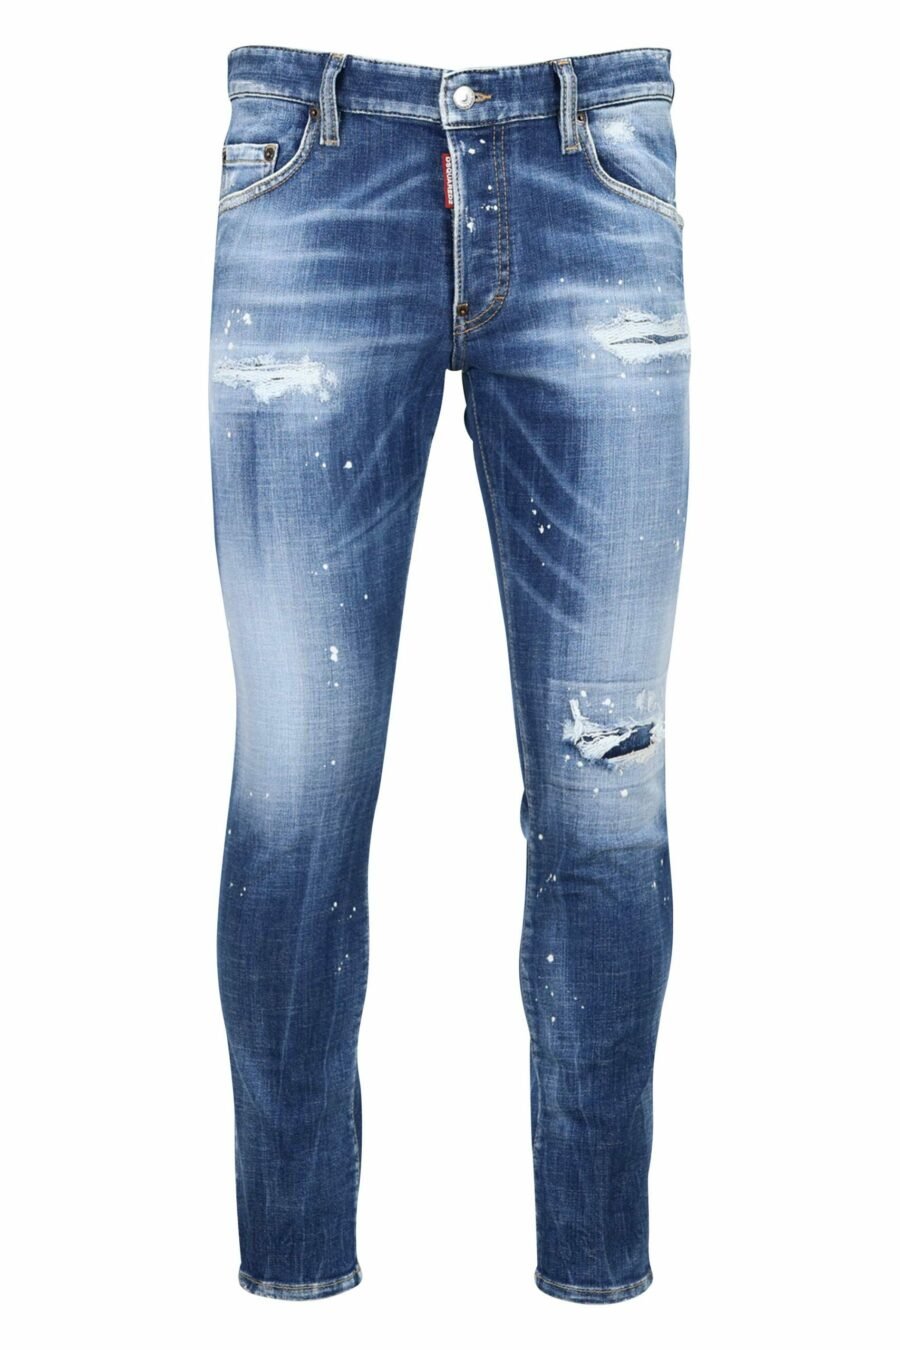 Skater jean light blue jeans with rips and tears - 8052134939482 1 1 scaled